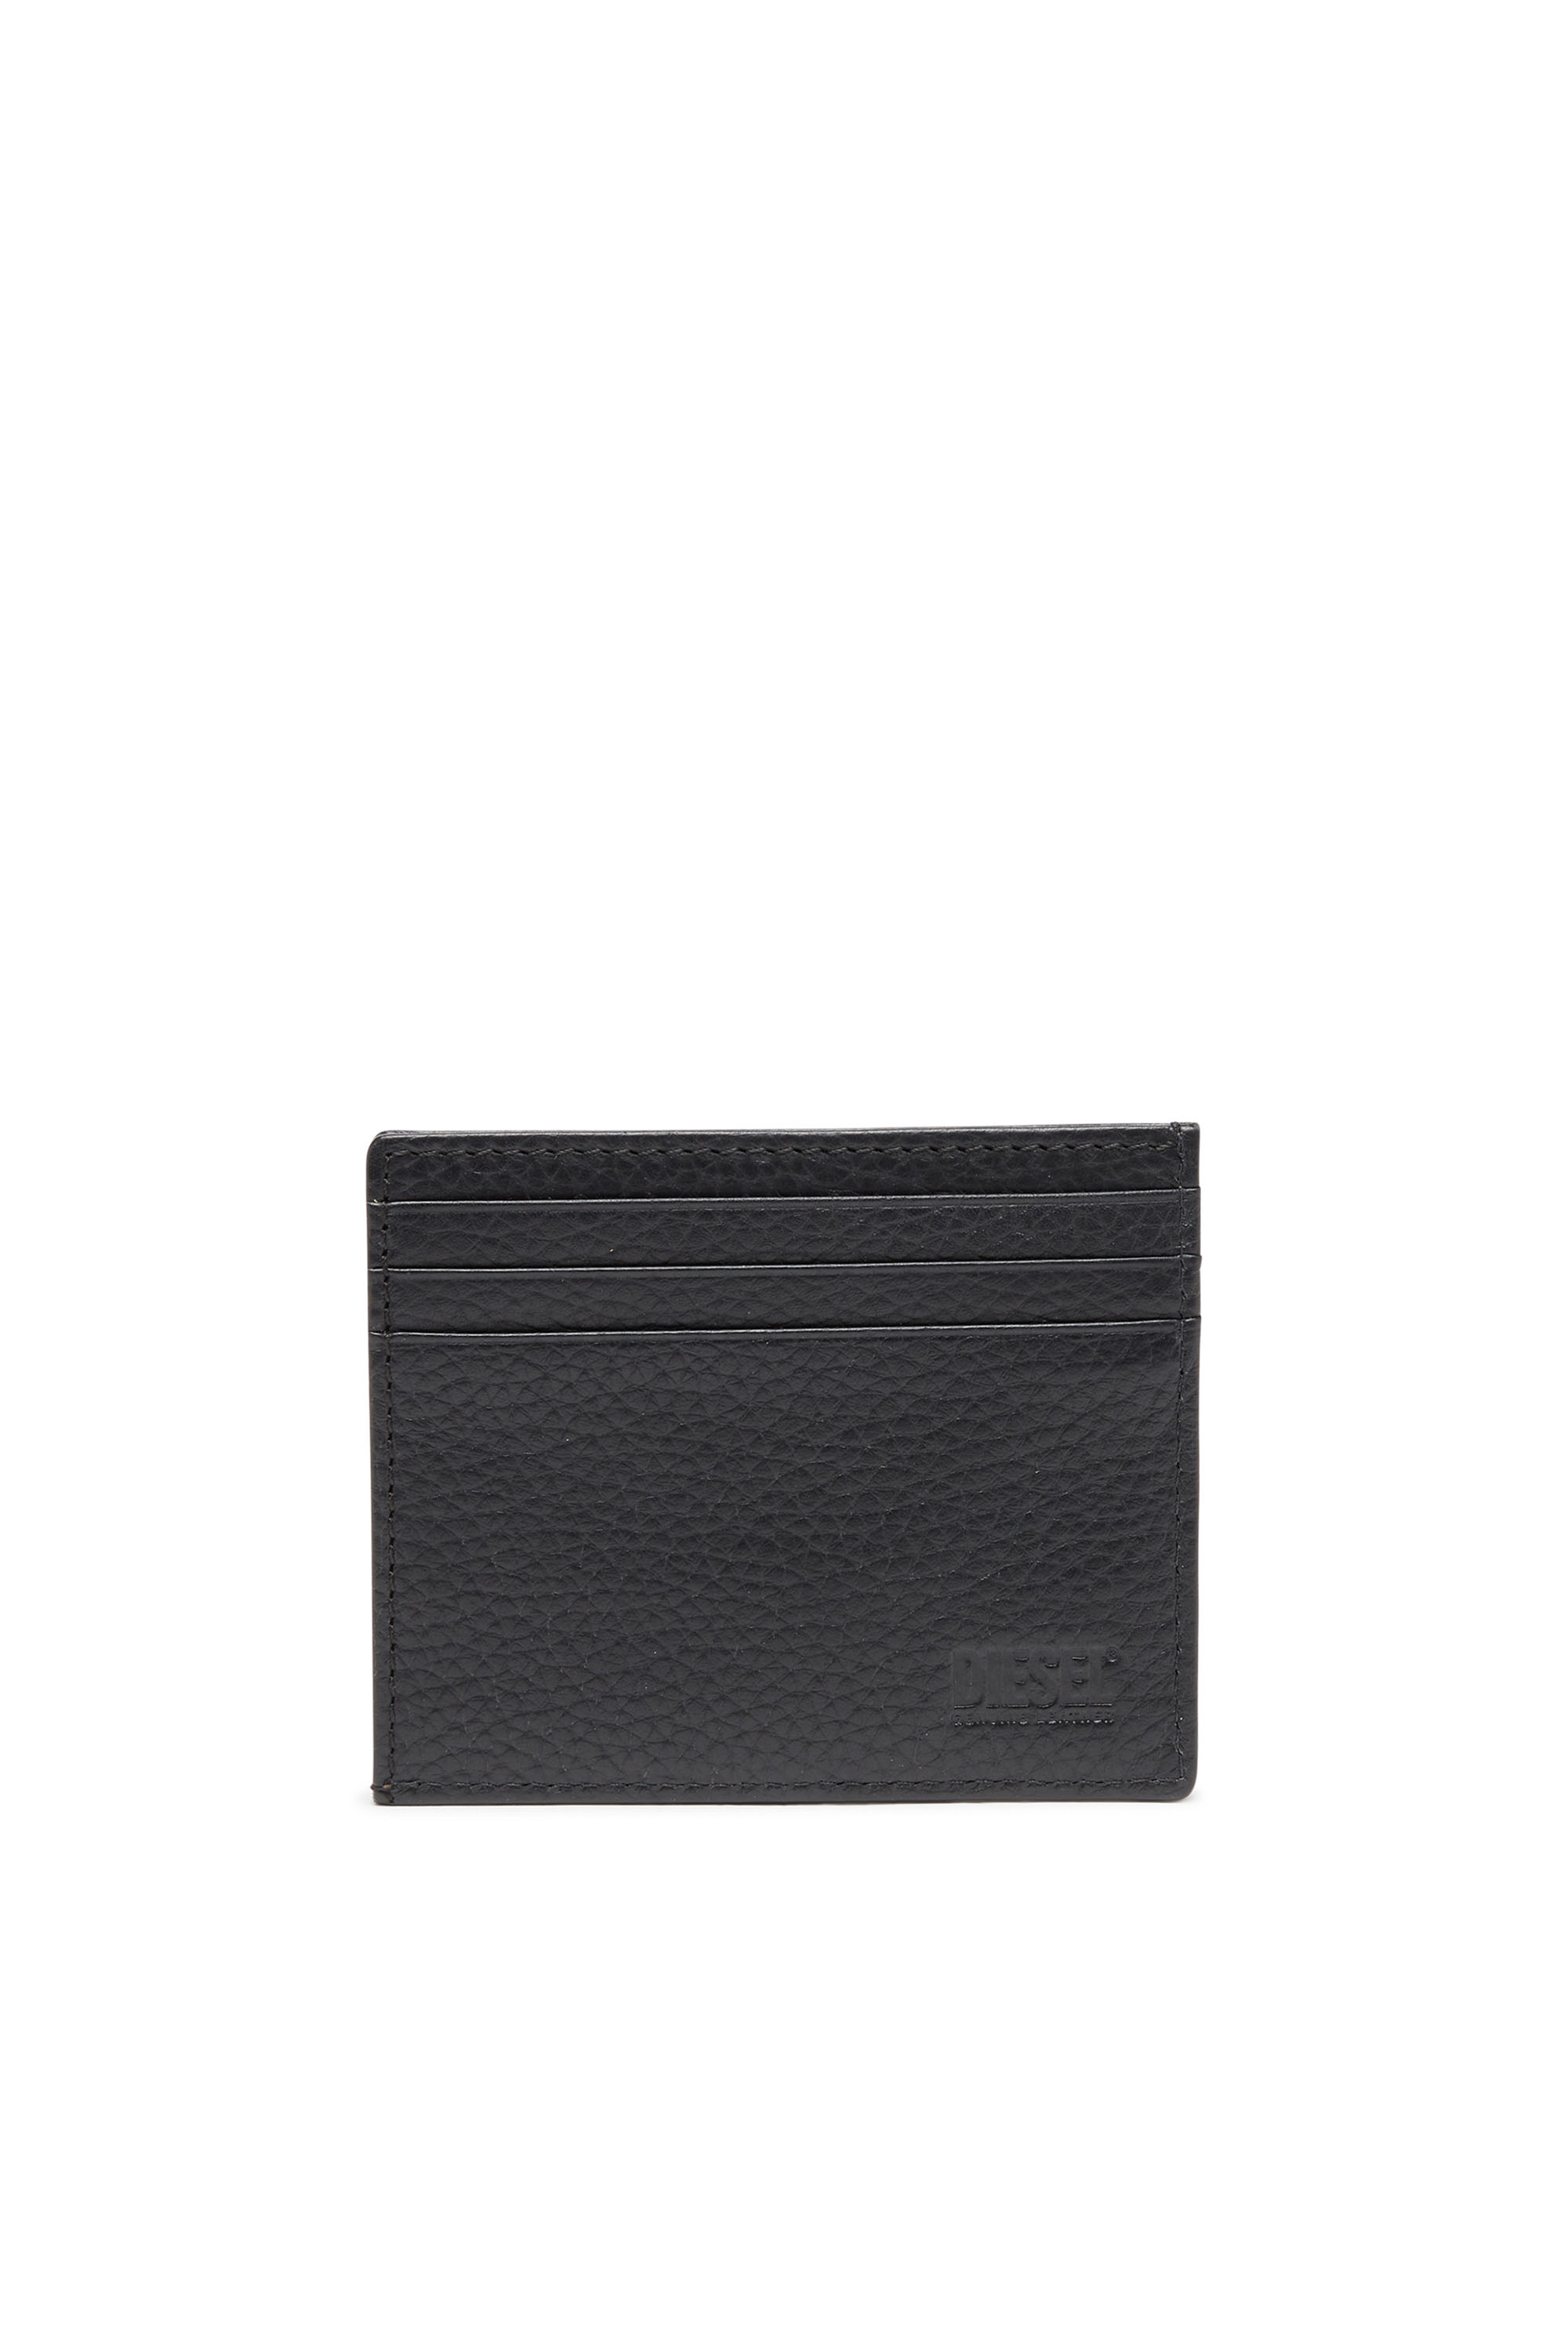 Diesel - CARD CASE, Man Card case in grained leather in Black - Image 3